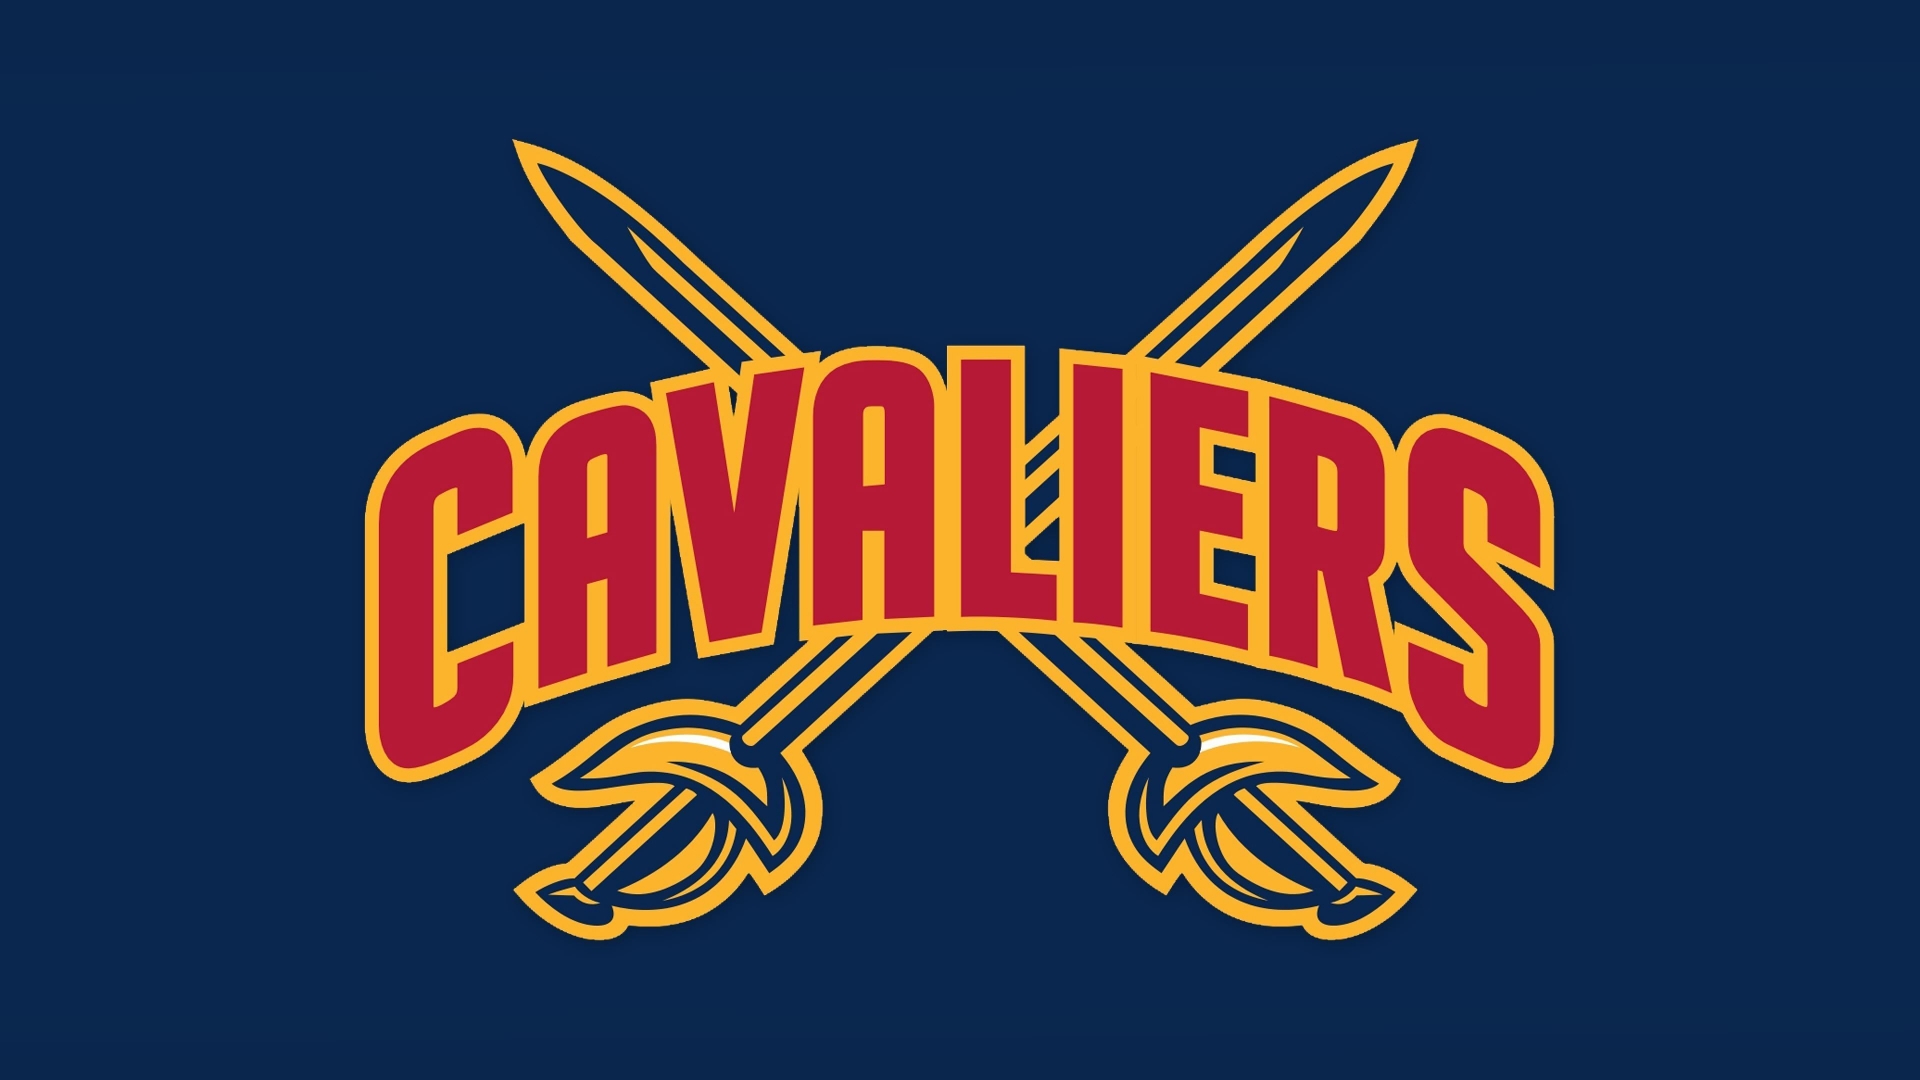 NBA Cleveland Cavaliers Logo for 1920 x 1080 HDTV 1080p resolution